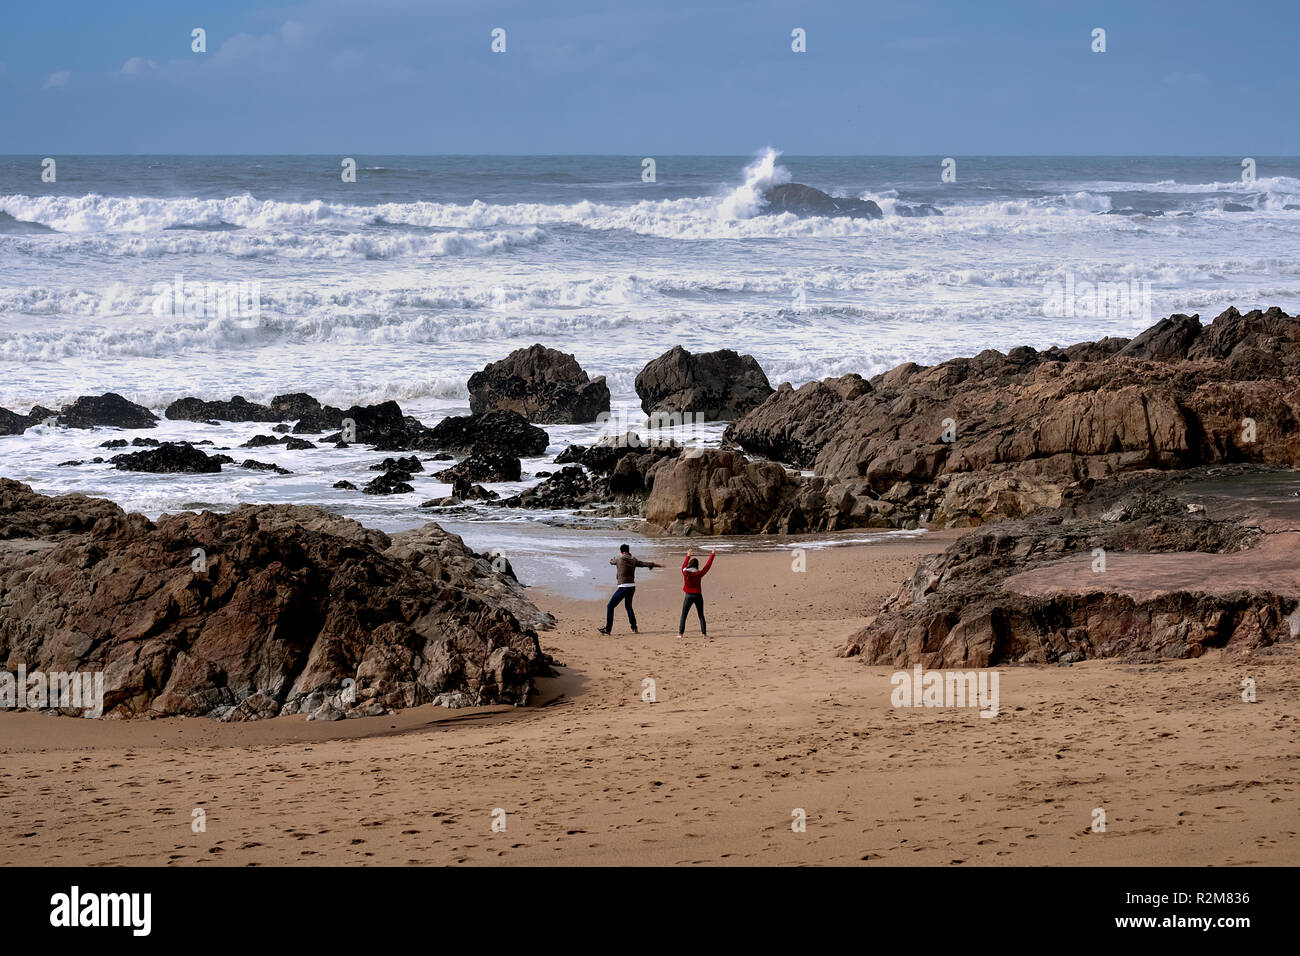 a couple doing exercise at the sea shore in a day of stormy waters, practicing the healthy lifestyle. zen mood Stock Photo